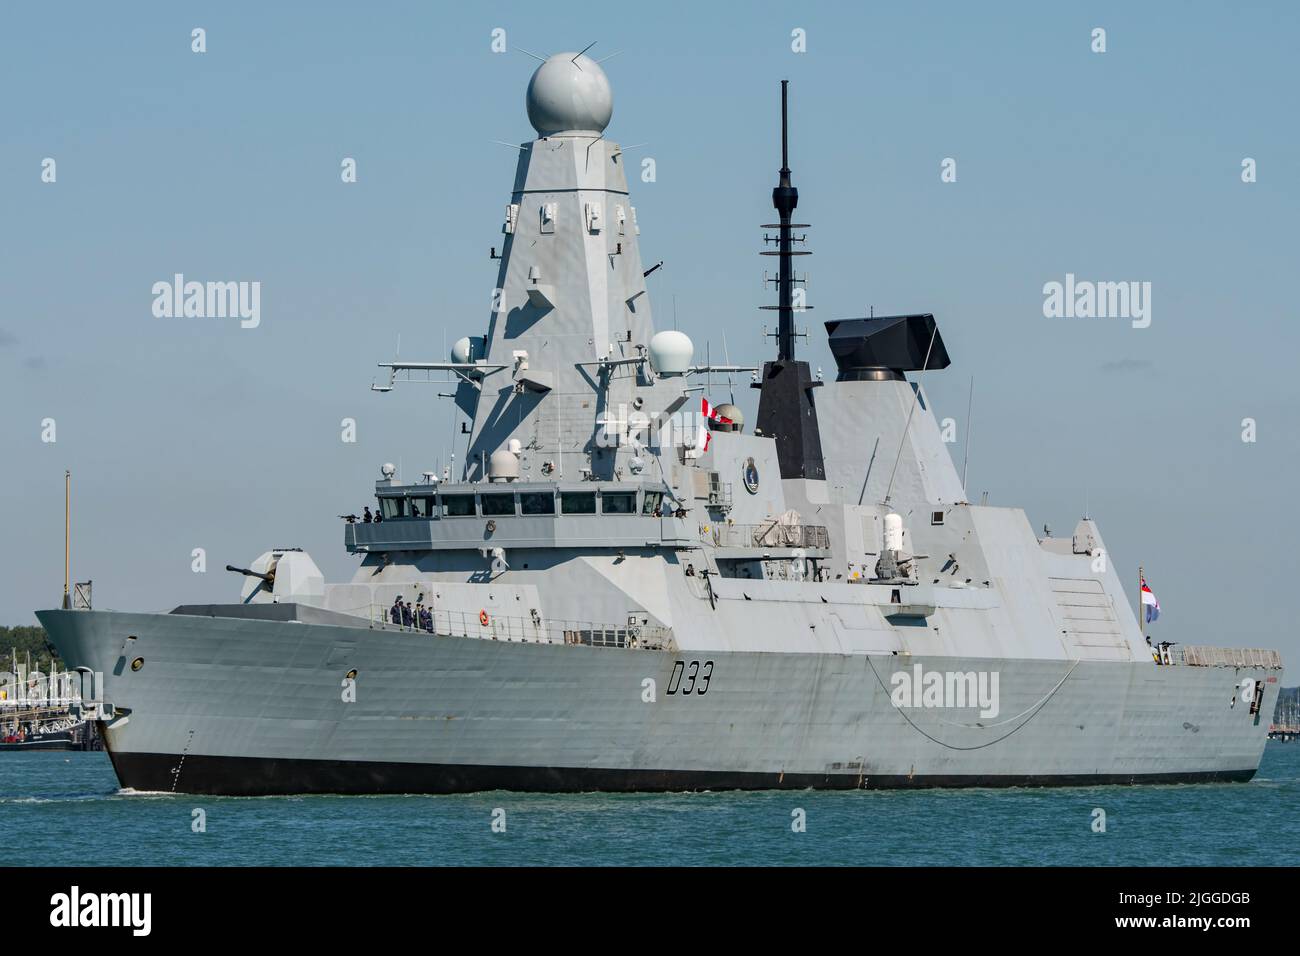 The Royal Navy air defence destroyer HMS Dauntless (D33) departed Portsmouth, UK on the 10th July 2022. Stock Photo